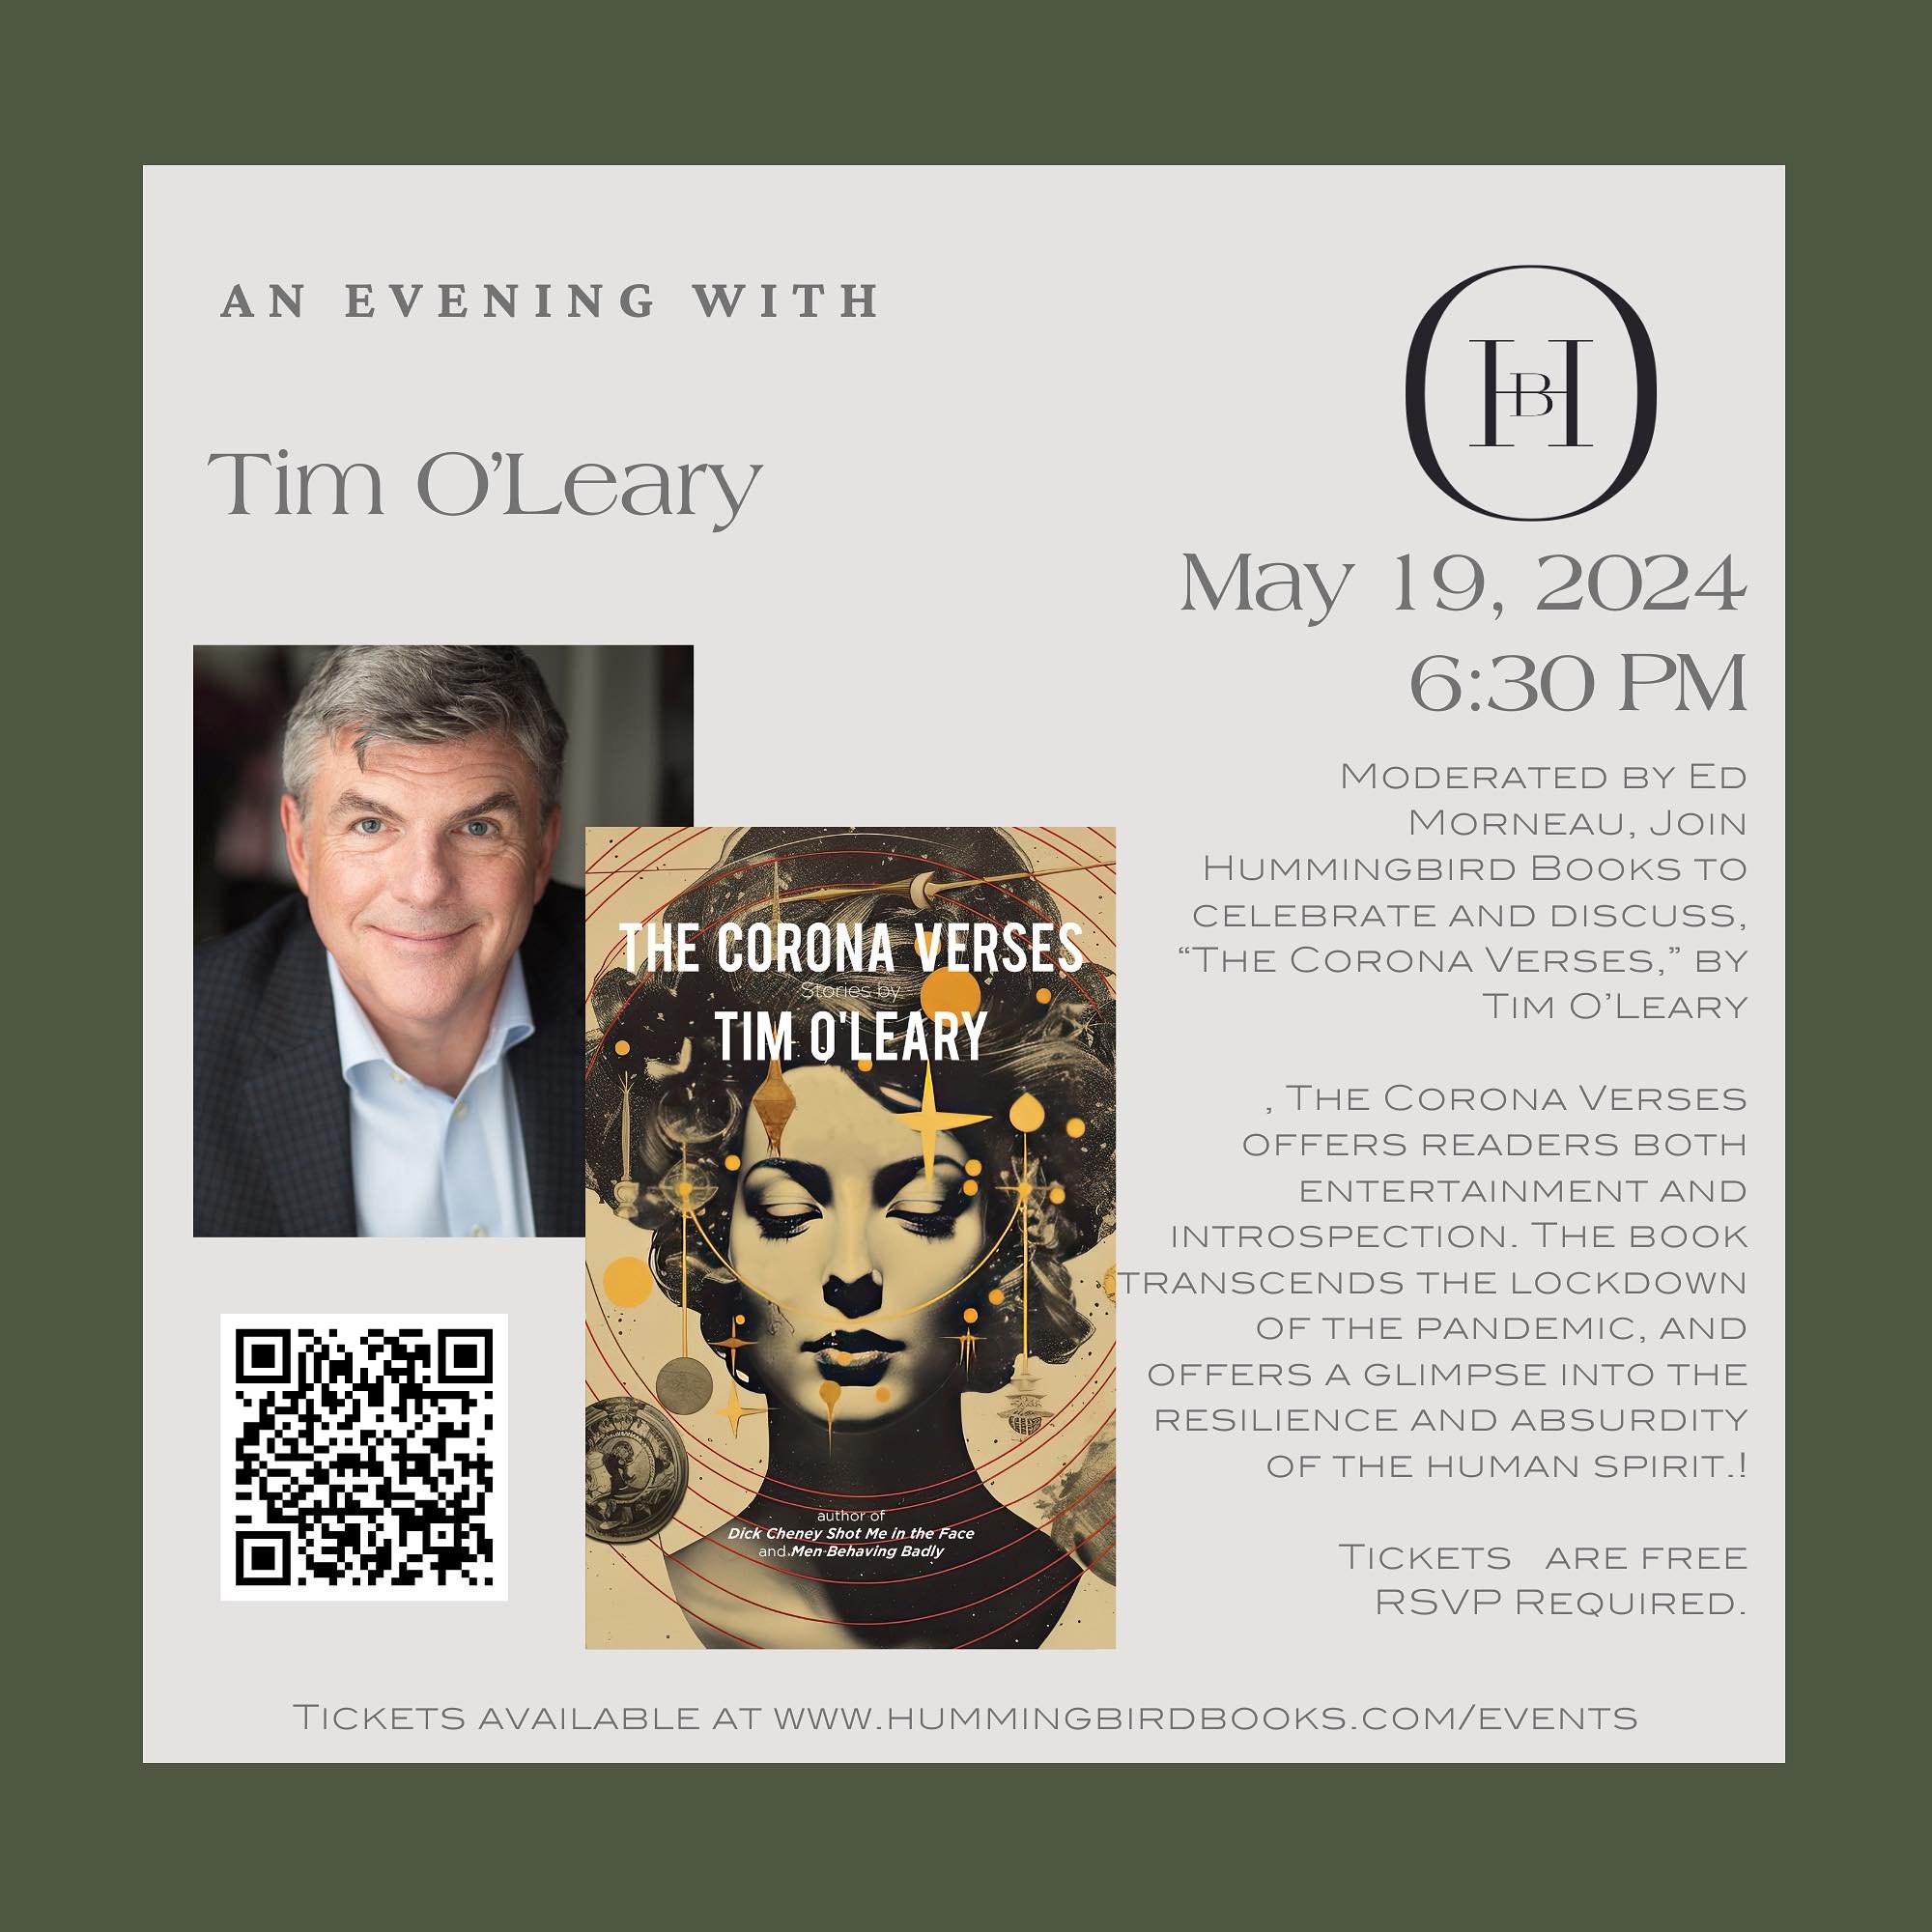 We&rsquo;re so excited to welcome Tim O&rsquo;Leary to the store to discuss his new book, &ldquo;The Corona Verses.&rdquo; Tickets are available on the events page of our website or through scanning the QR code on this post! 

#indiebookstore #chestn